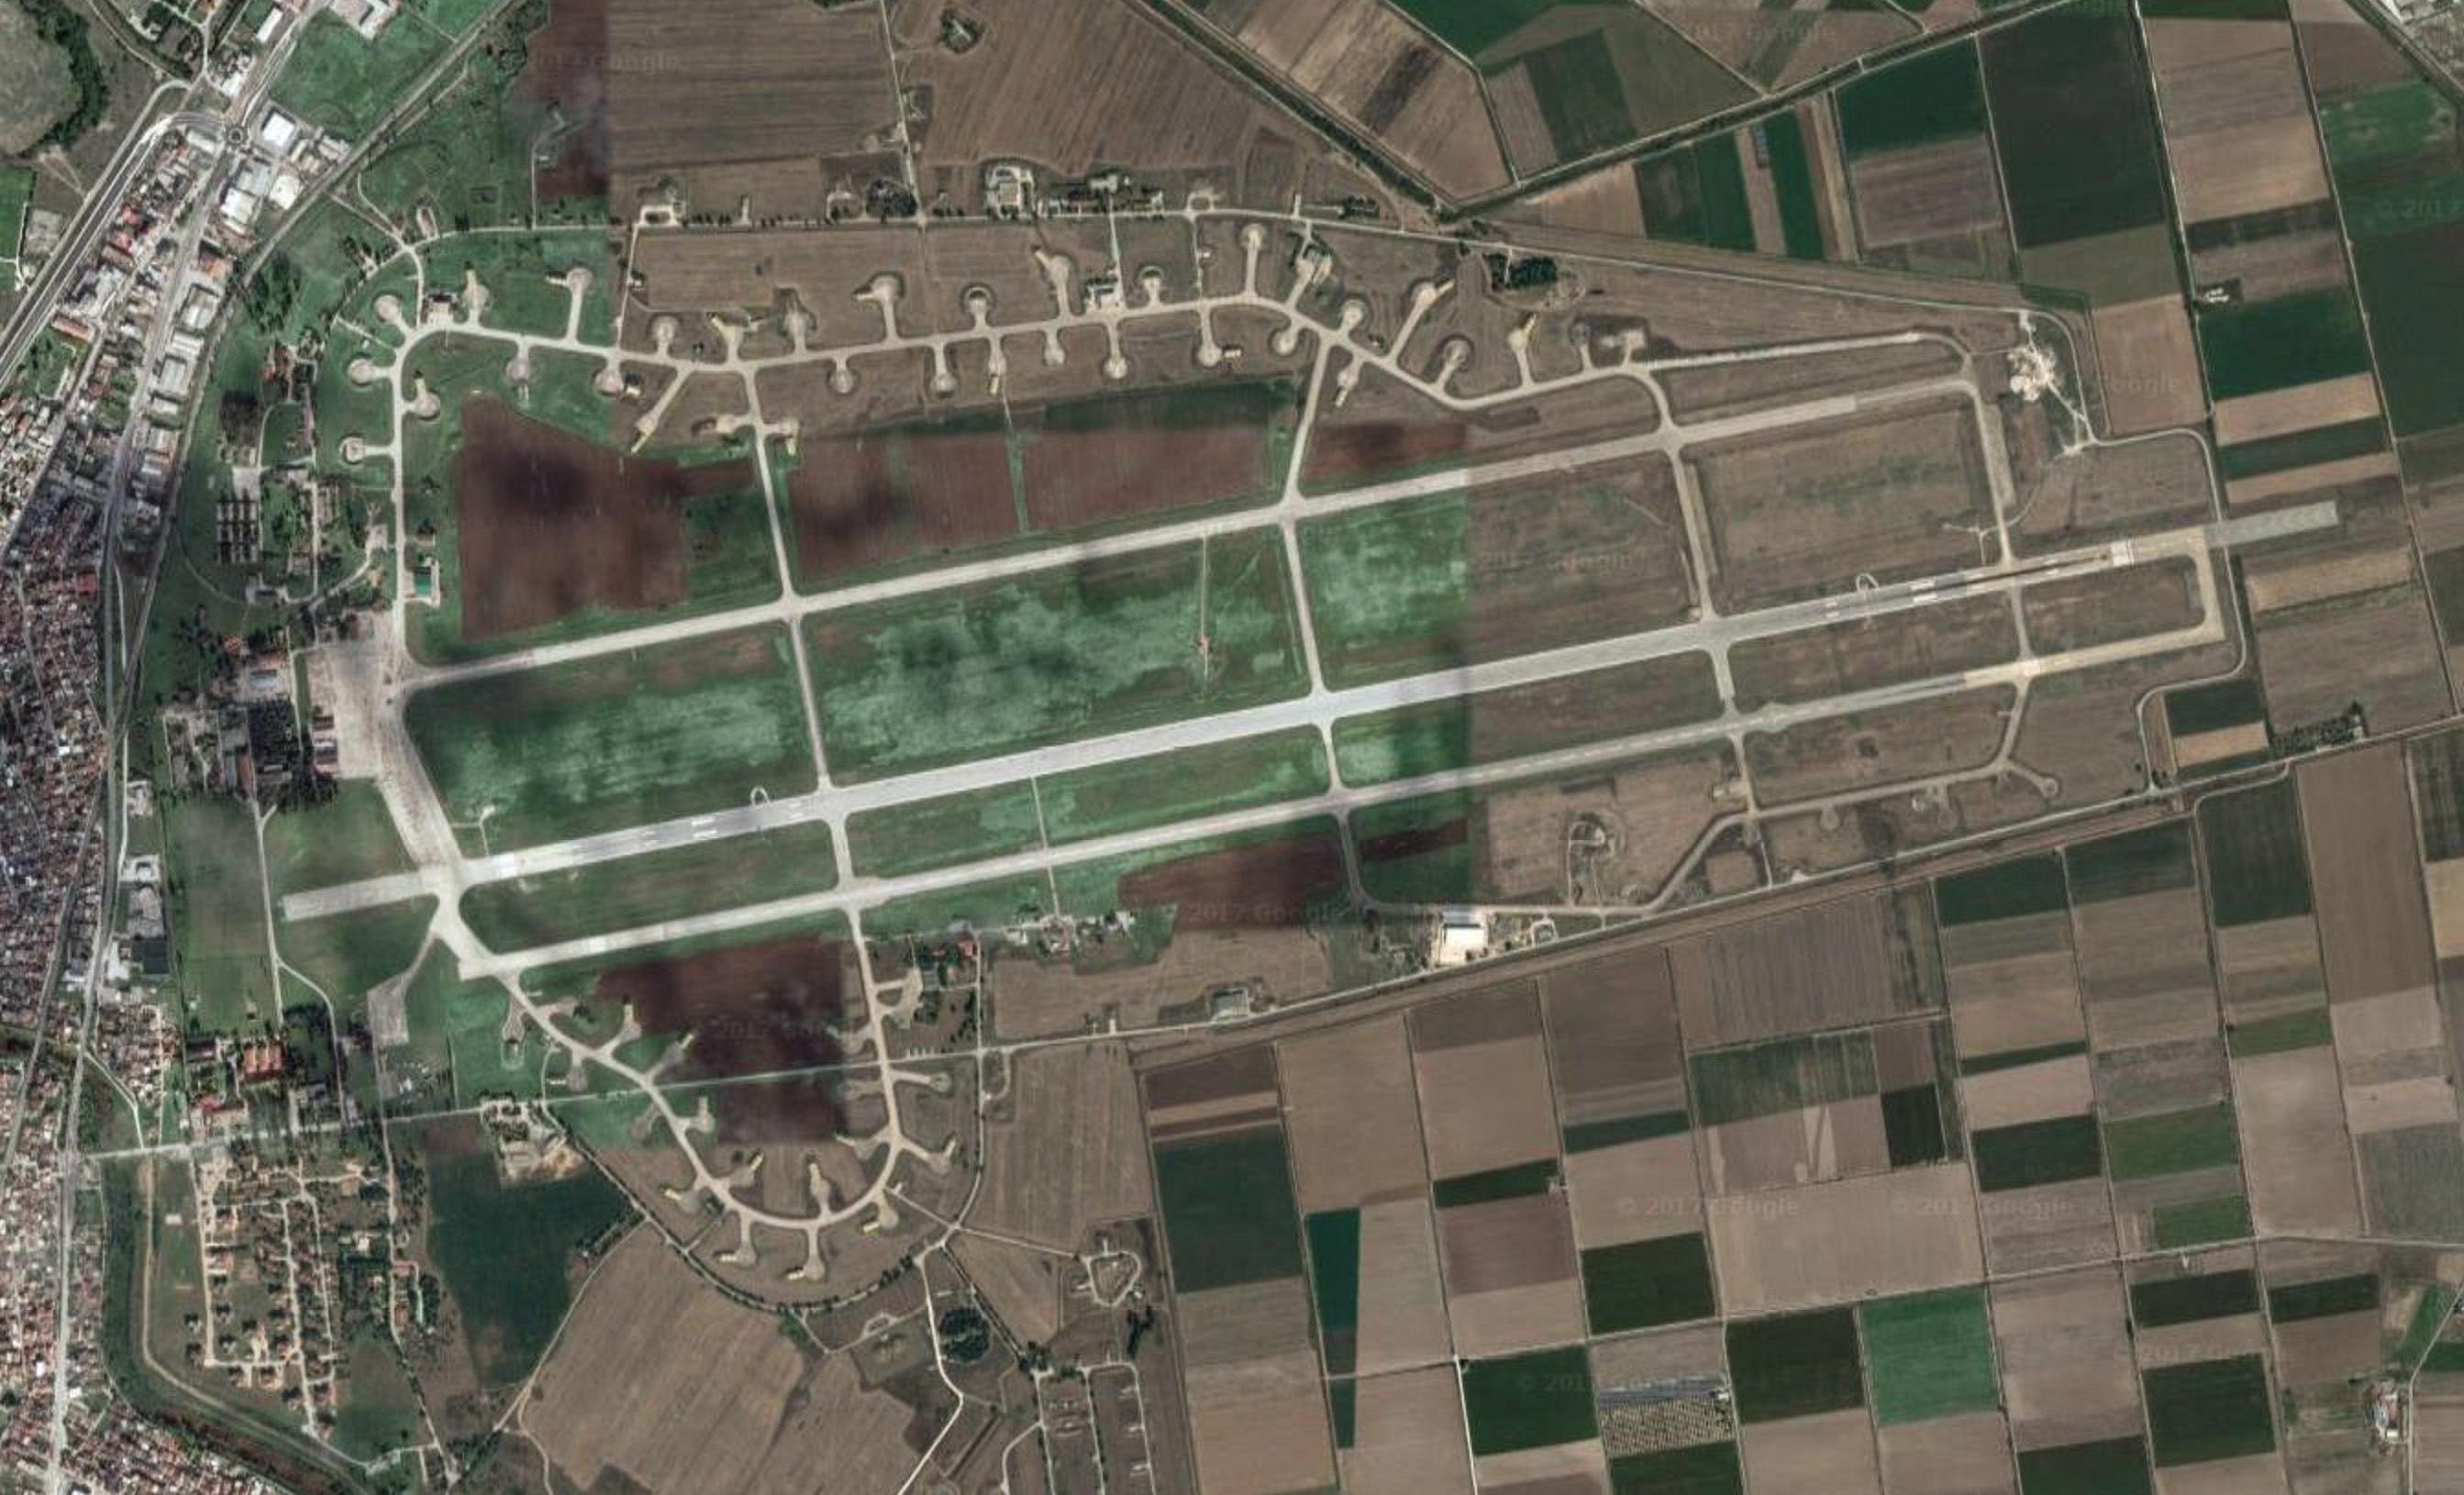 An aerial view of Larissa Air Force Base in northern Greece. 348 TRS occupied the northern edge, whereas 337 Squadron, an F-16 unit, still occupies the southern side. (photo via Googlemaps)